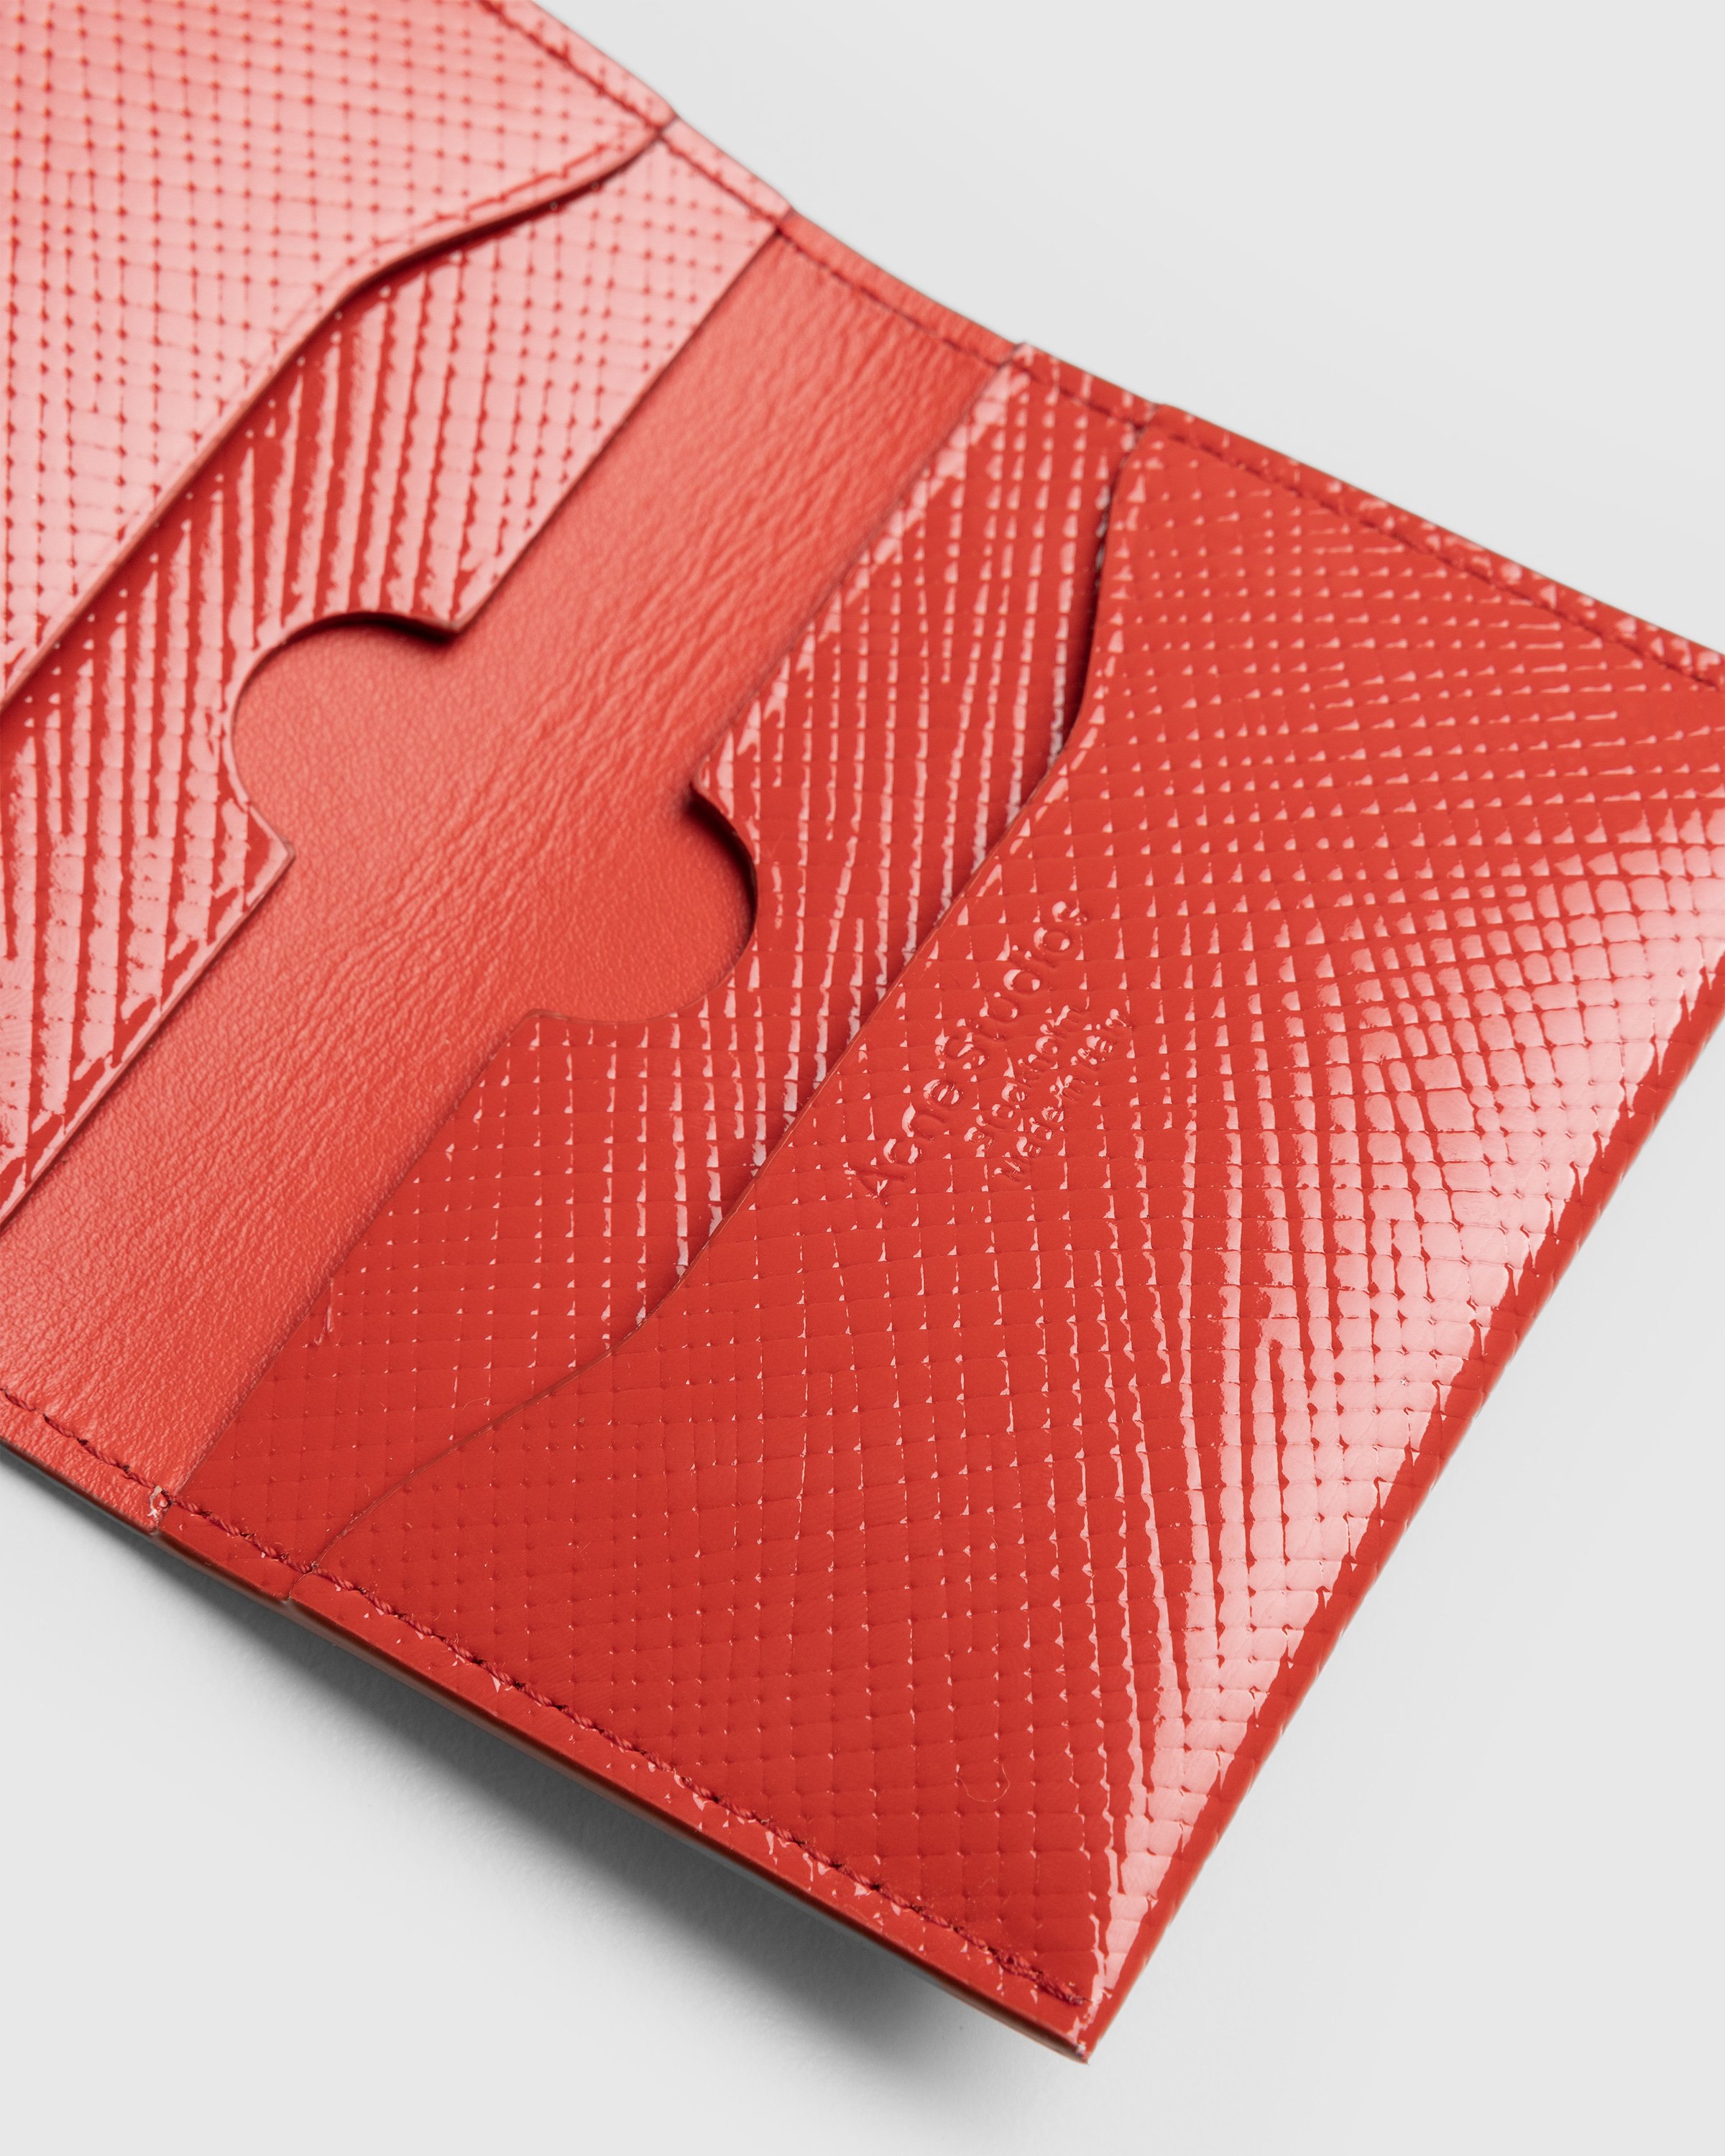 Acne Studios - Folded Card Holder Red - Accessories - Red - Image 5